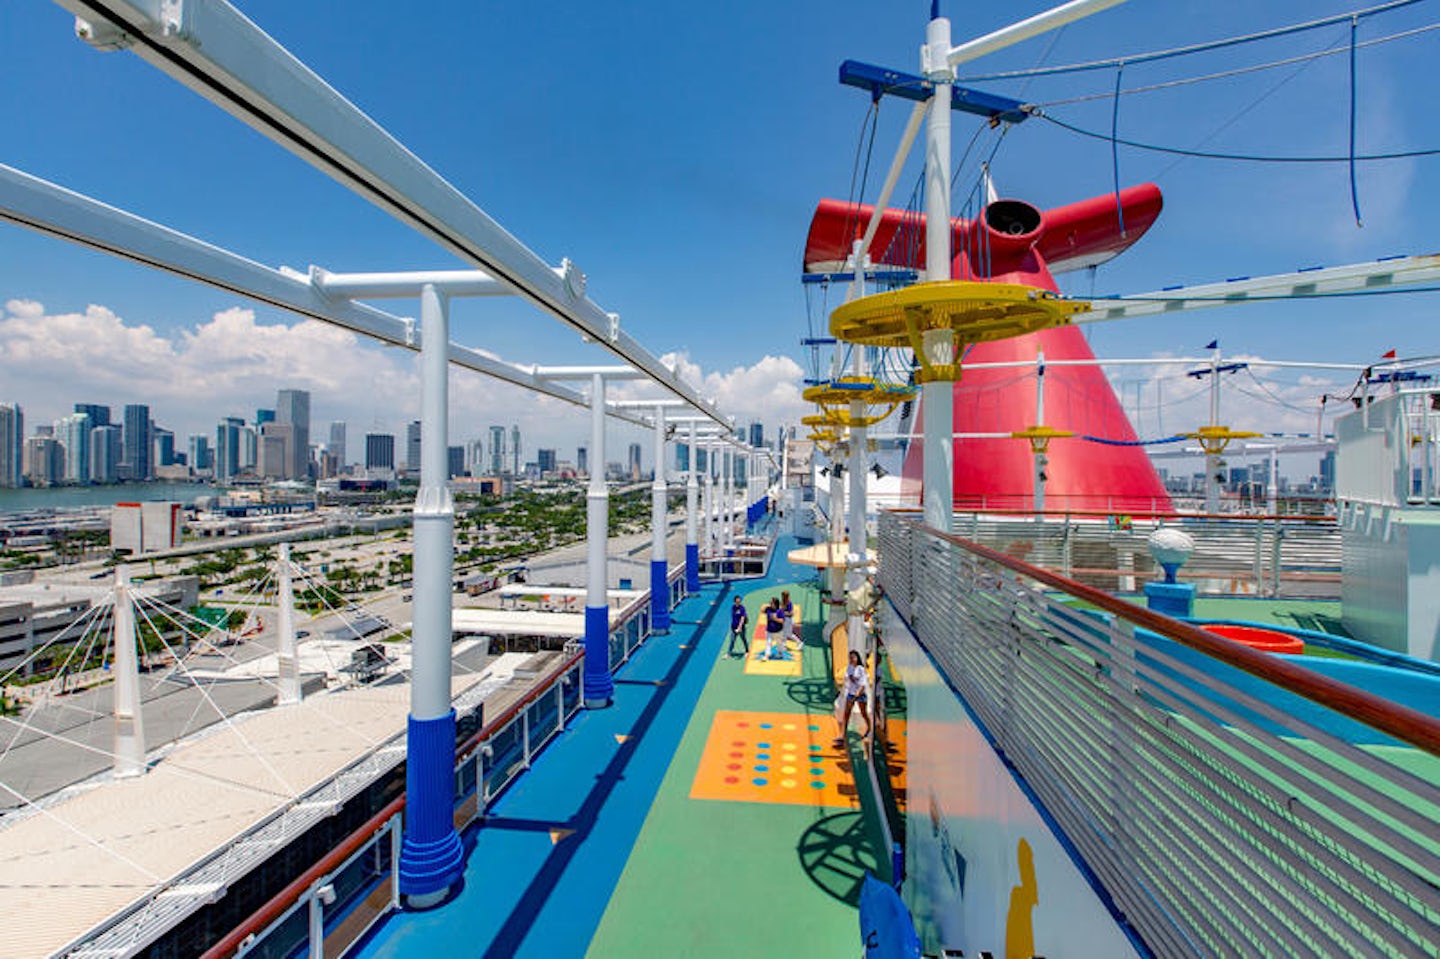 which carnival cruise has the skyride